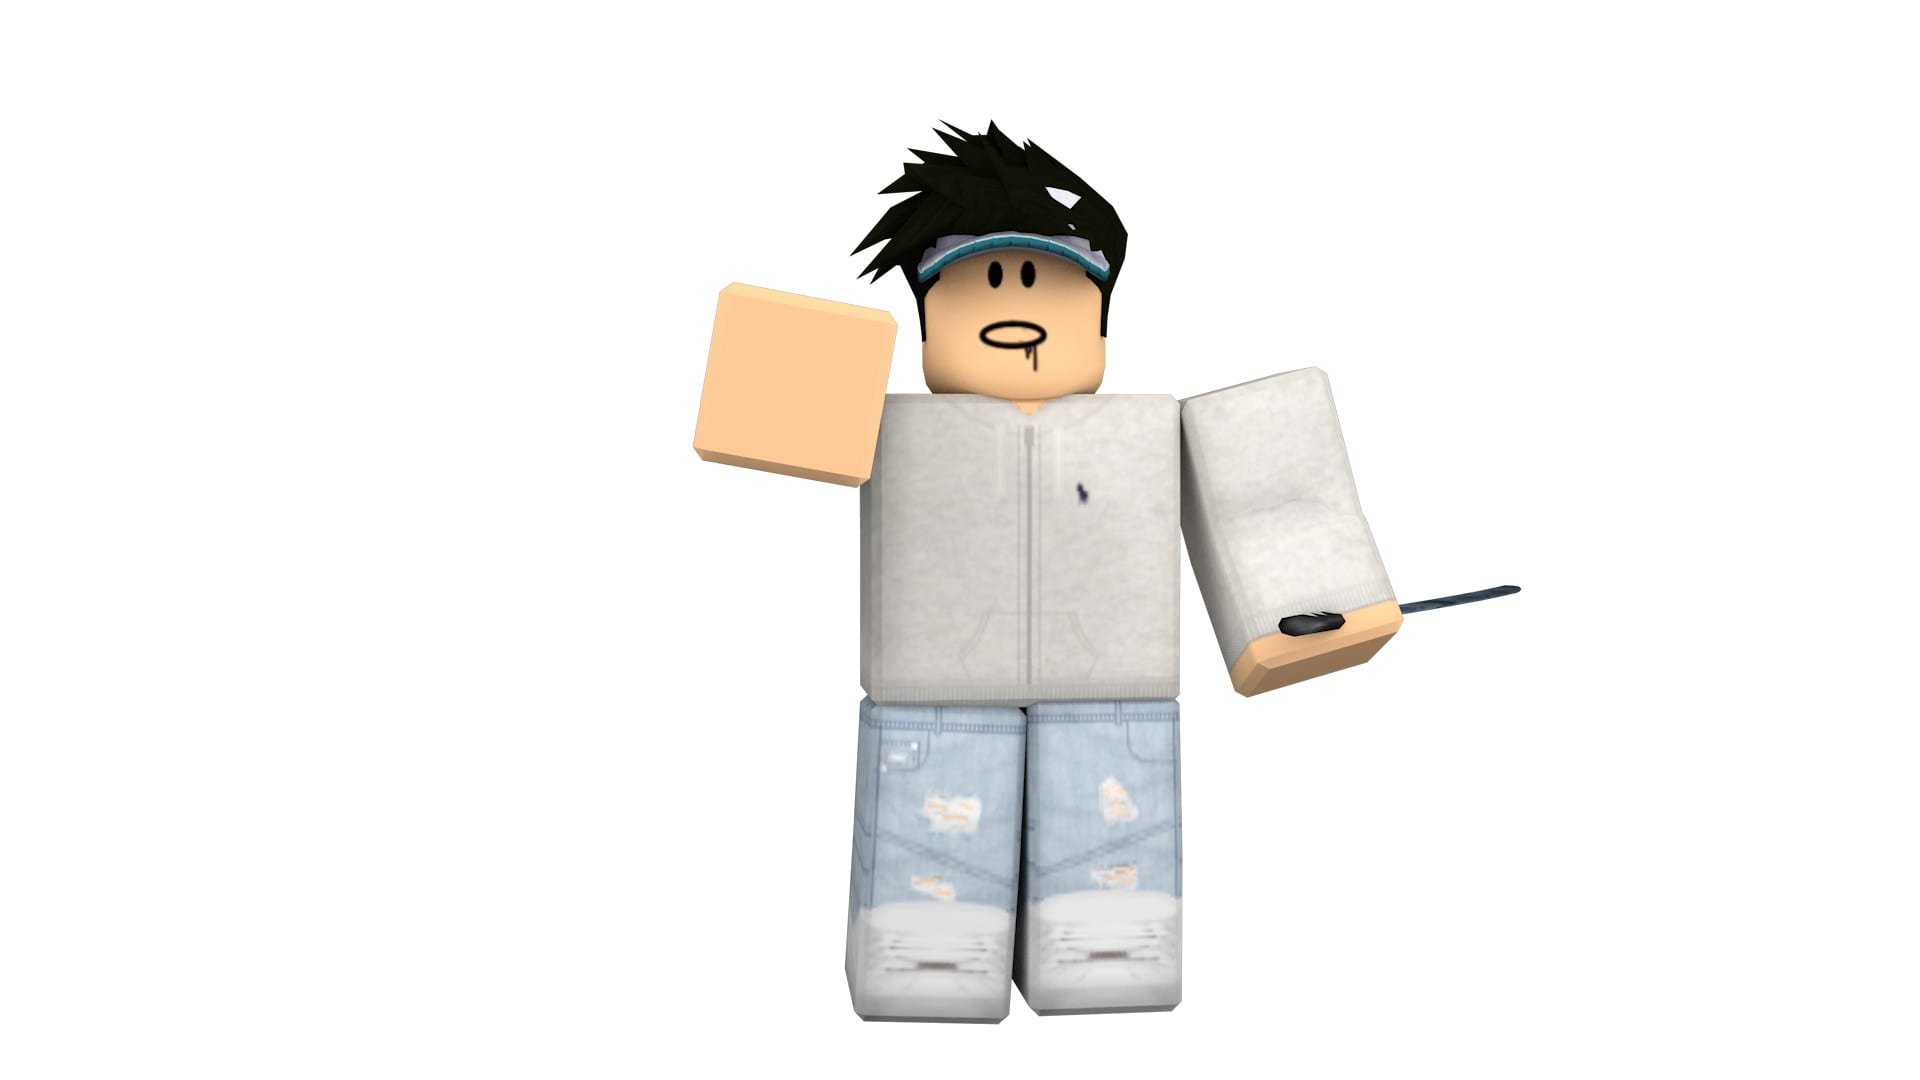 Get Your Own Roblox Gfx By Fruitymoon - roblox gfx character